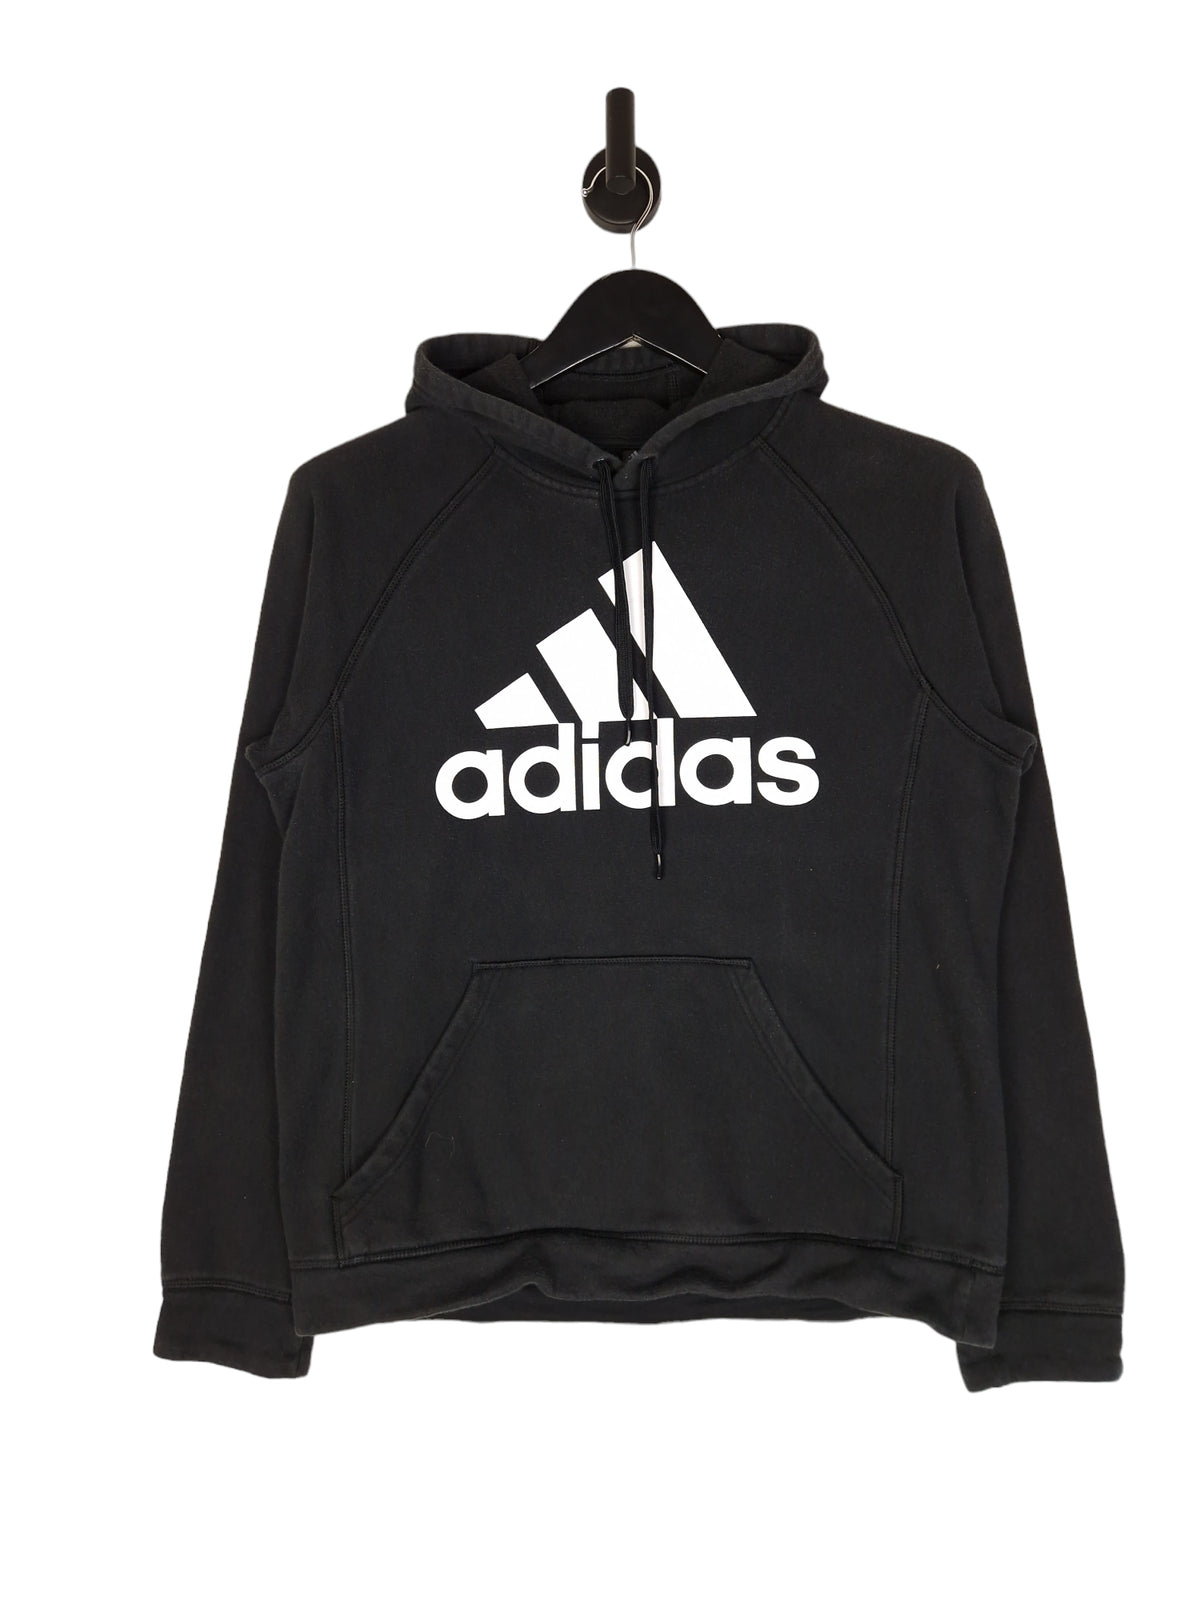 Adidas Spell Out Hoodie - Size Small